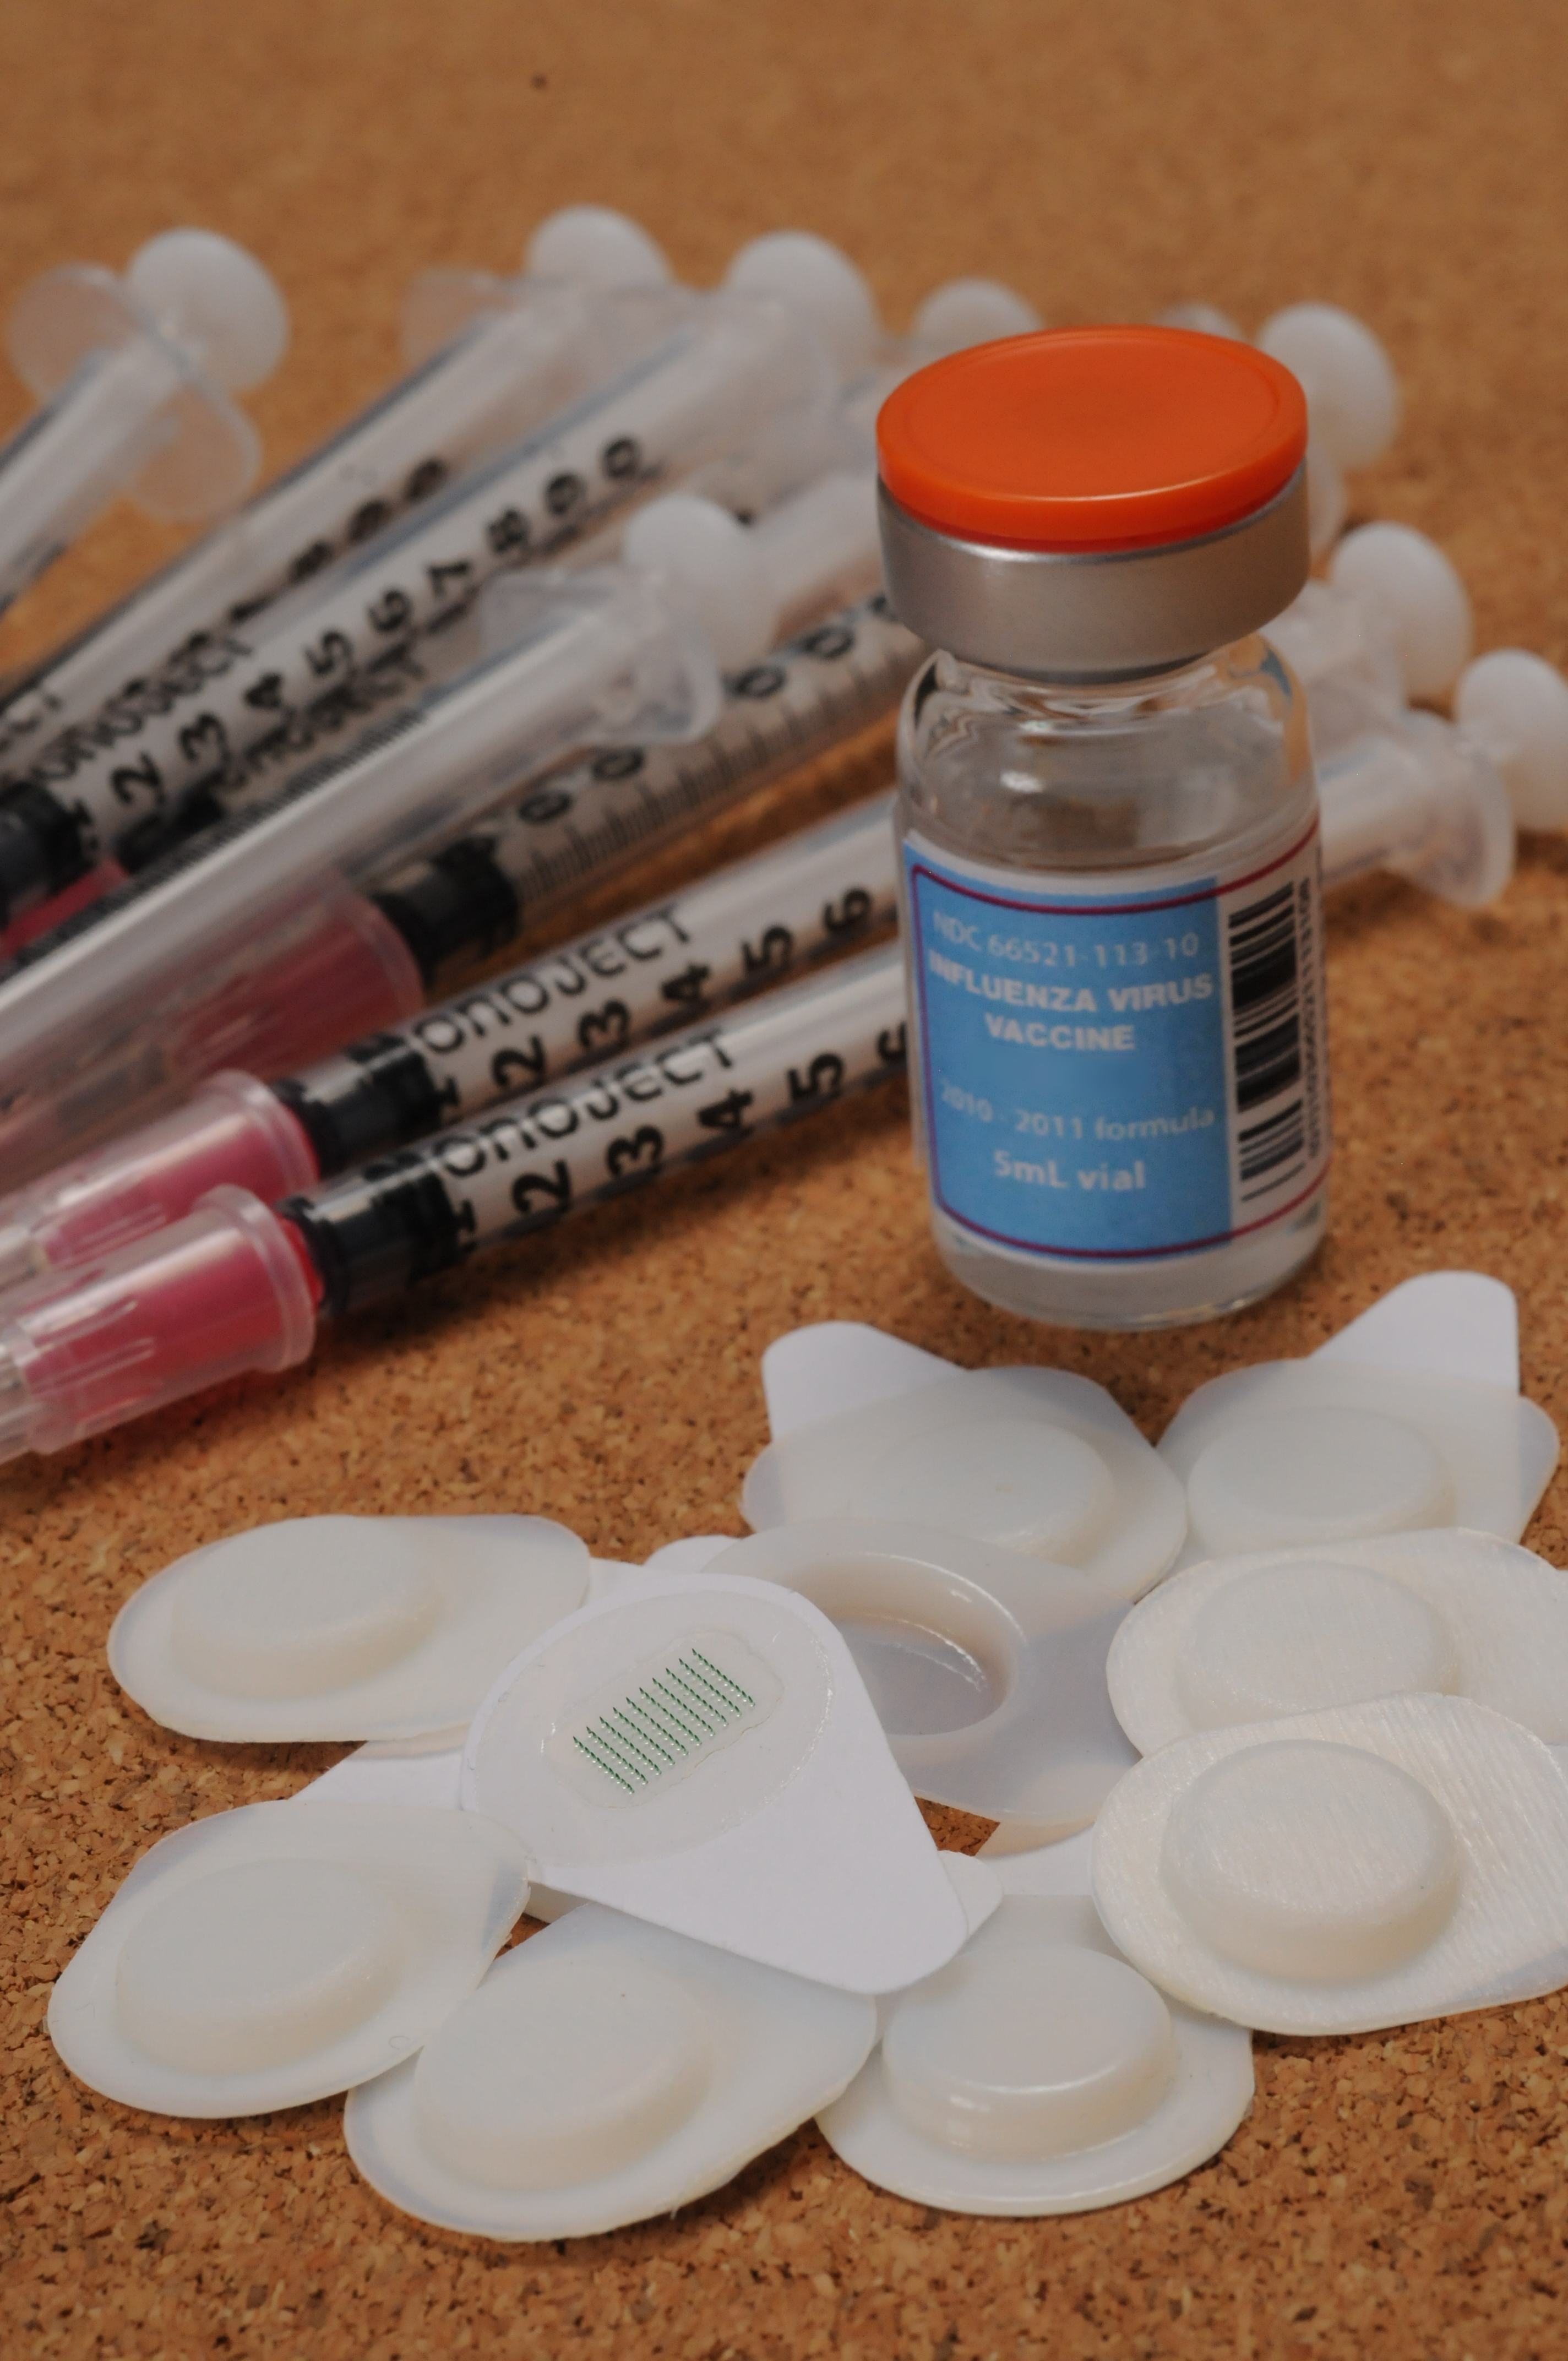 Ten microneedle patches are shown with a ten-dose vial of influenza vaccine and ten hypodermic needles with syringes. (Georgia Tech Photo: Gary Meek)